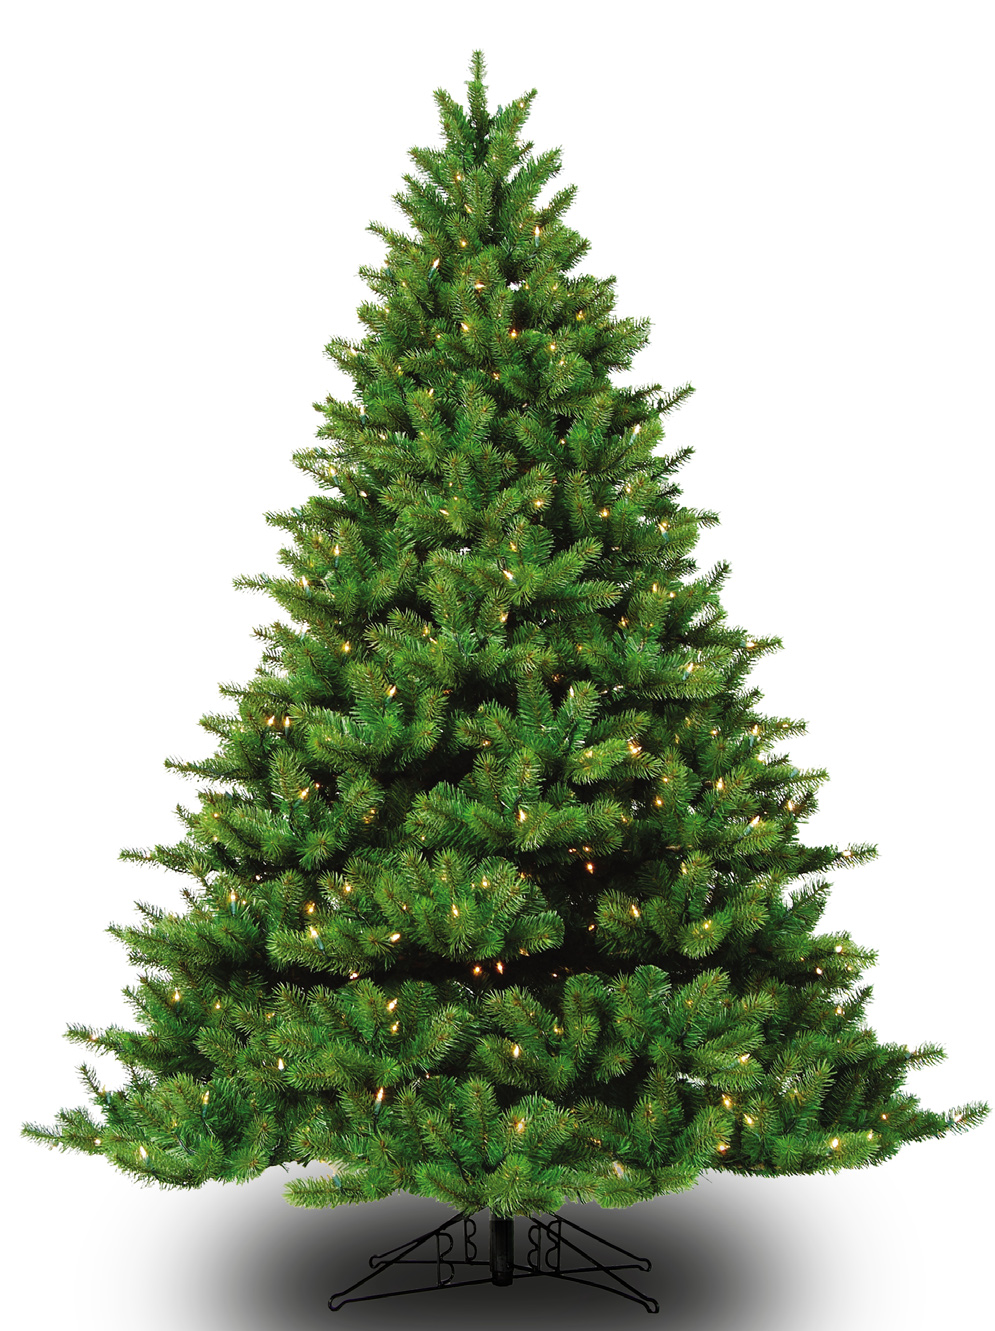 Appalachian Deluxe Christmas Tree - 7-Color Multi-LED w/ Twinkle - One-Plug Design - 7.5ft Tall